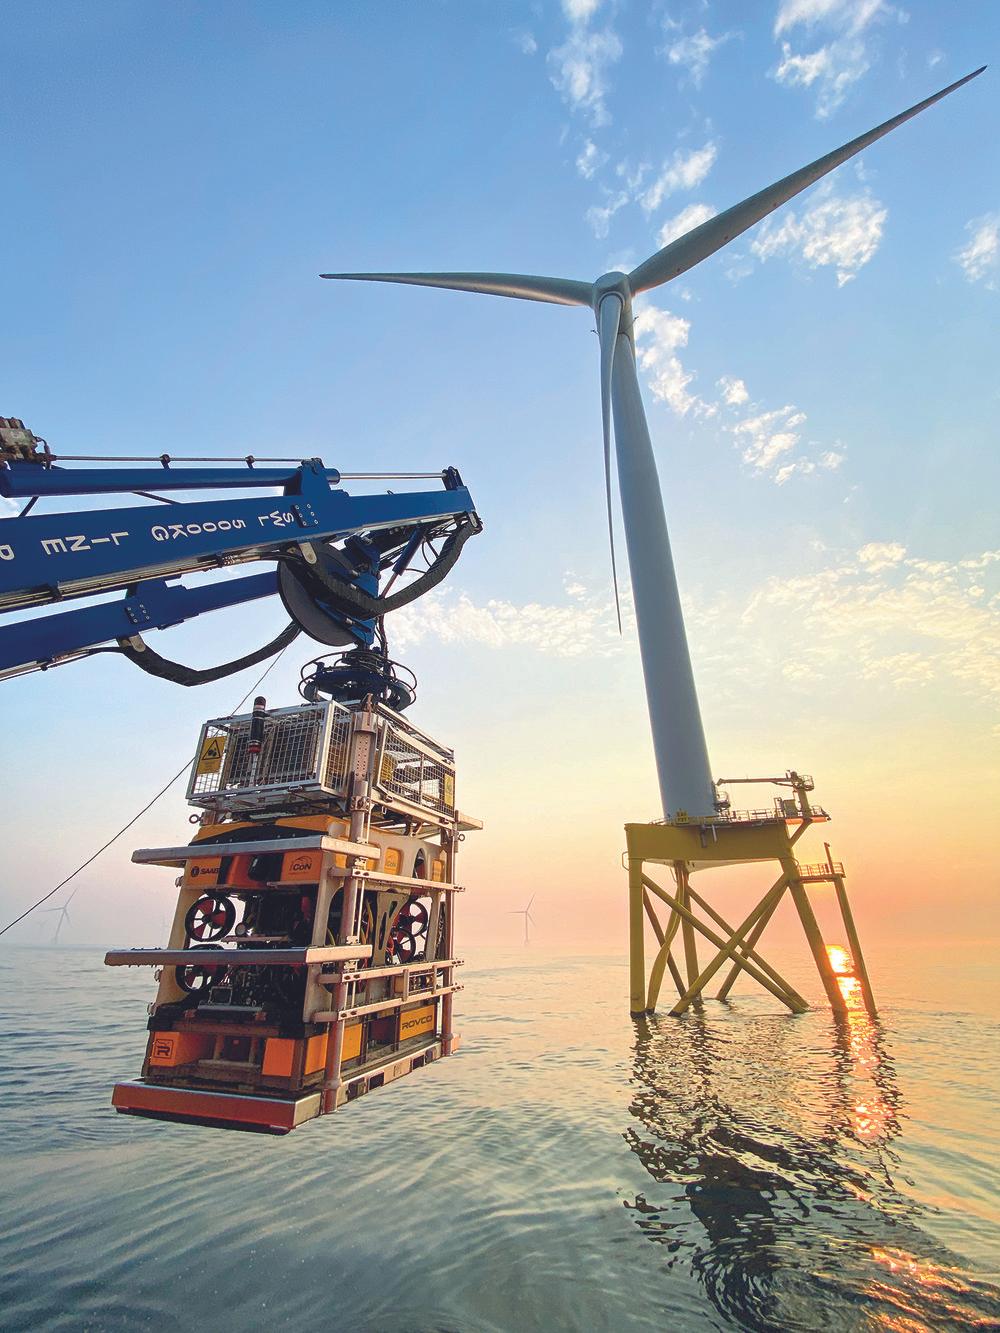 Rovco at Beatrice Offshore Wind Farm, F4OR Wales, ORE Catapult